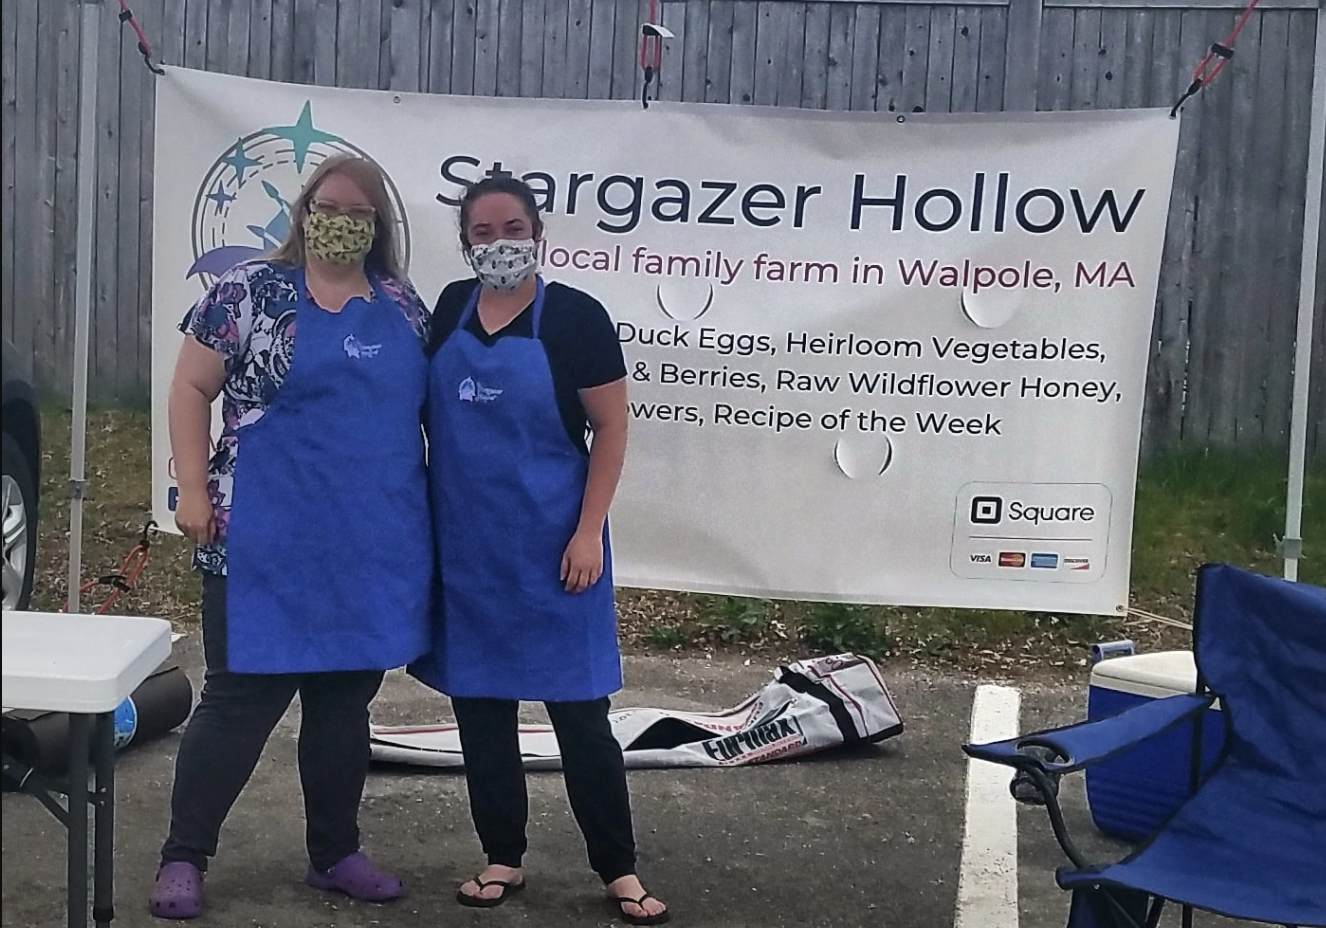 Meghan and her sister Hannah are at a farmers market, in front of the sign. They are wearing masks.